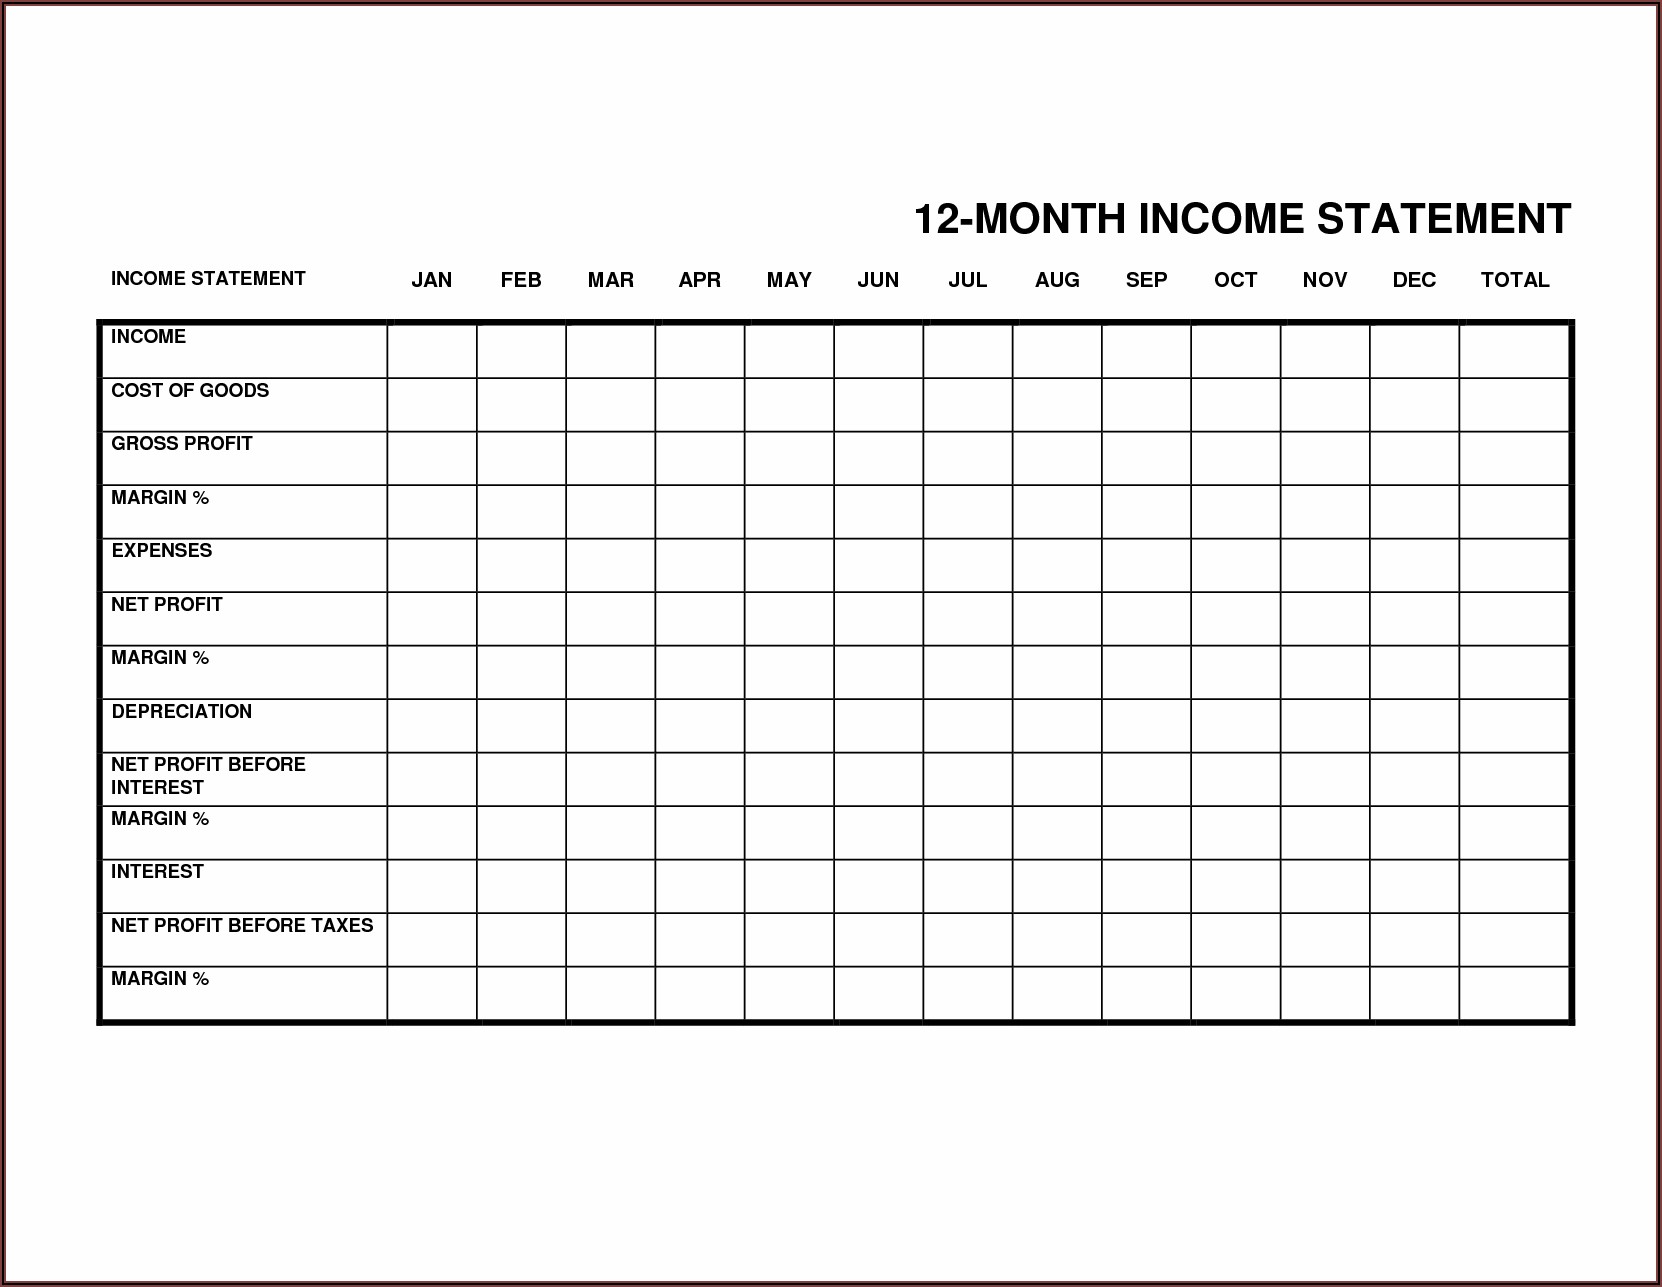 Profit And Loss Statement Template Monthly